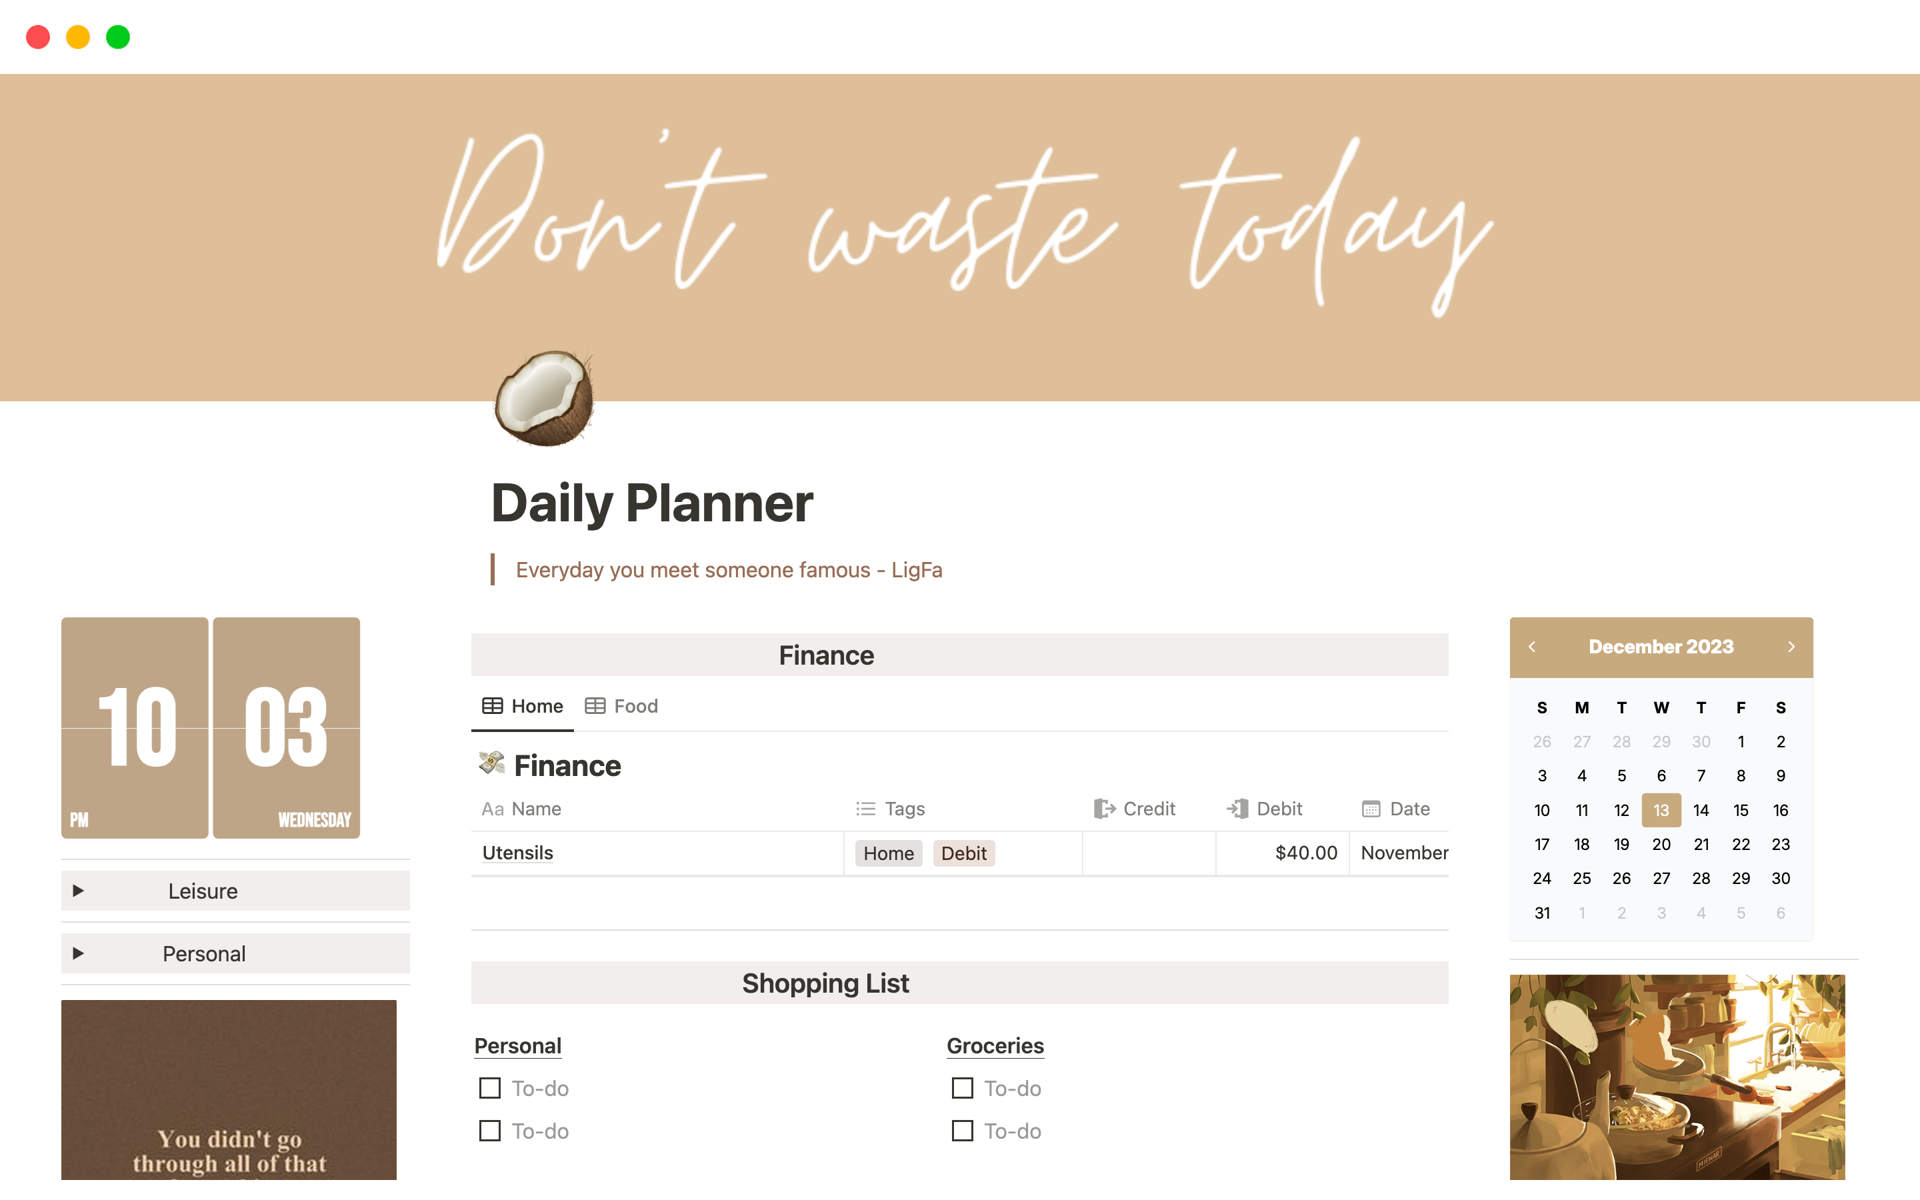 Plan your daily tasks with this template!